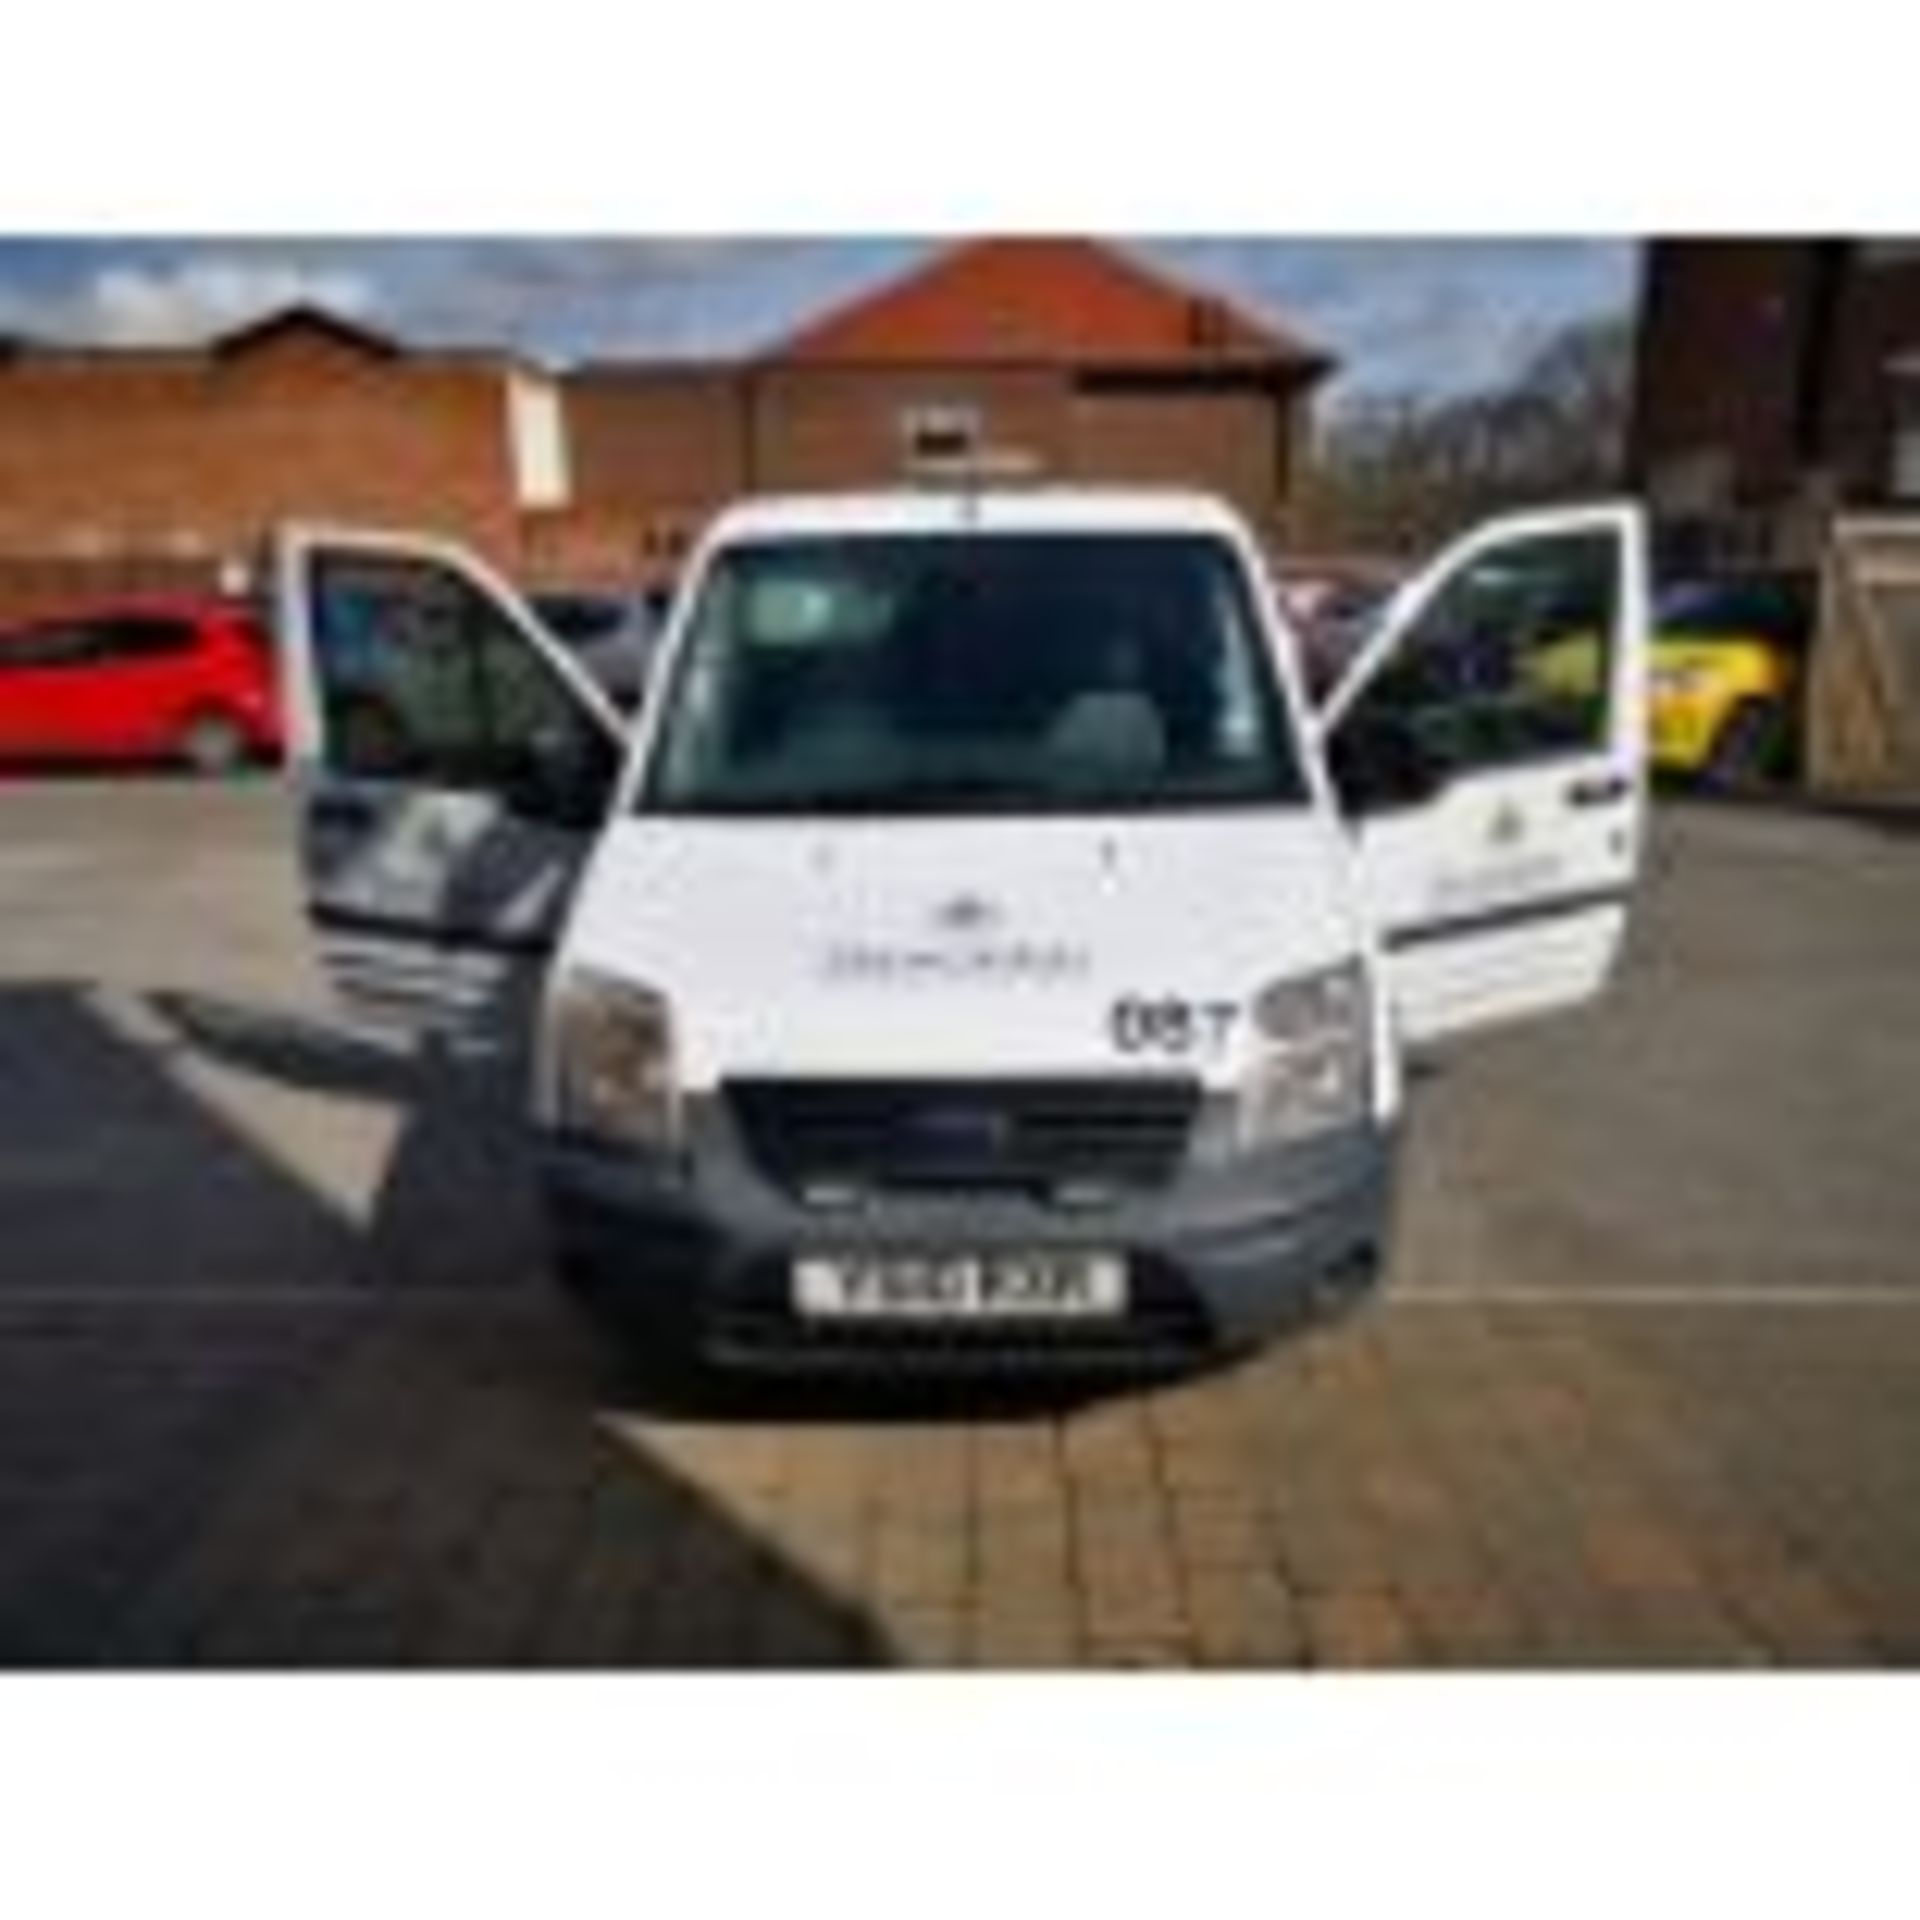 ENTRY DIRECT FROM LOCAL AUTHORITY Ford Transit Con - Image 10 of 23